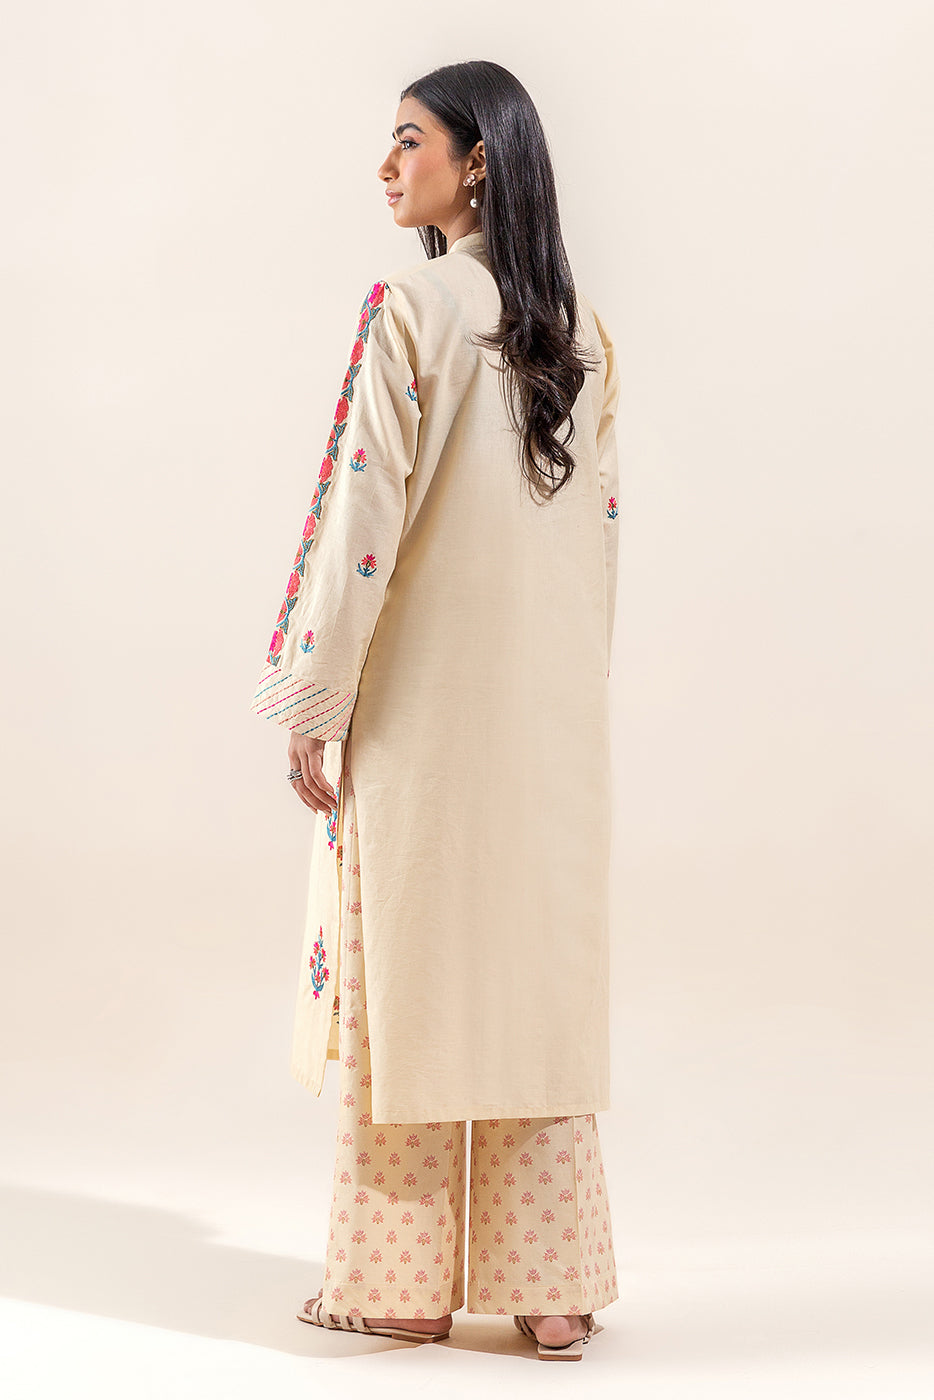 2 PIECE EMBROIDERED LAWN SUIT-FRENCH VANILLA (UNSTITCHED)